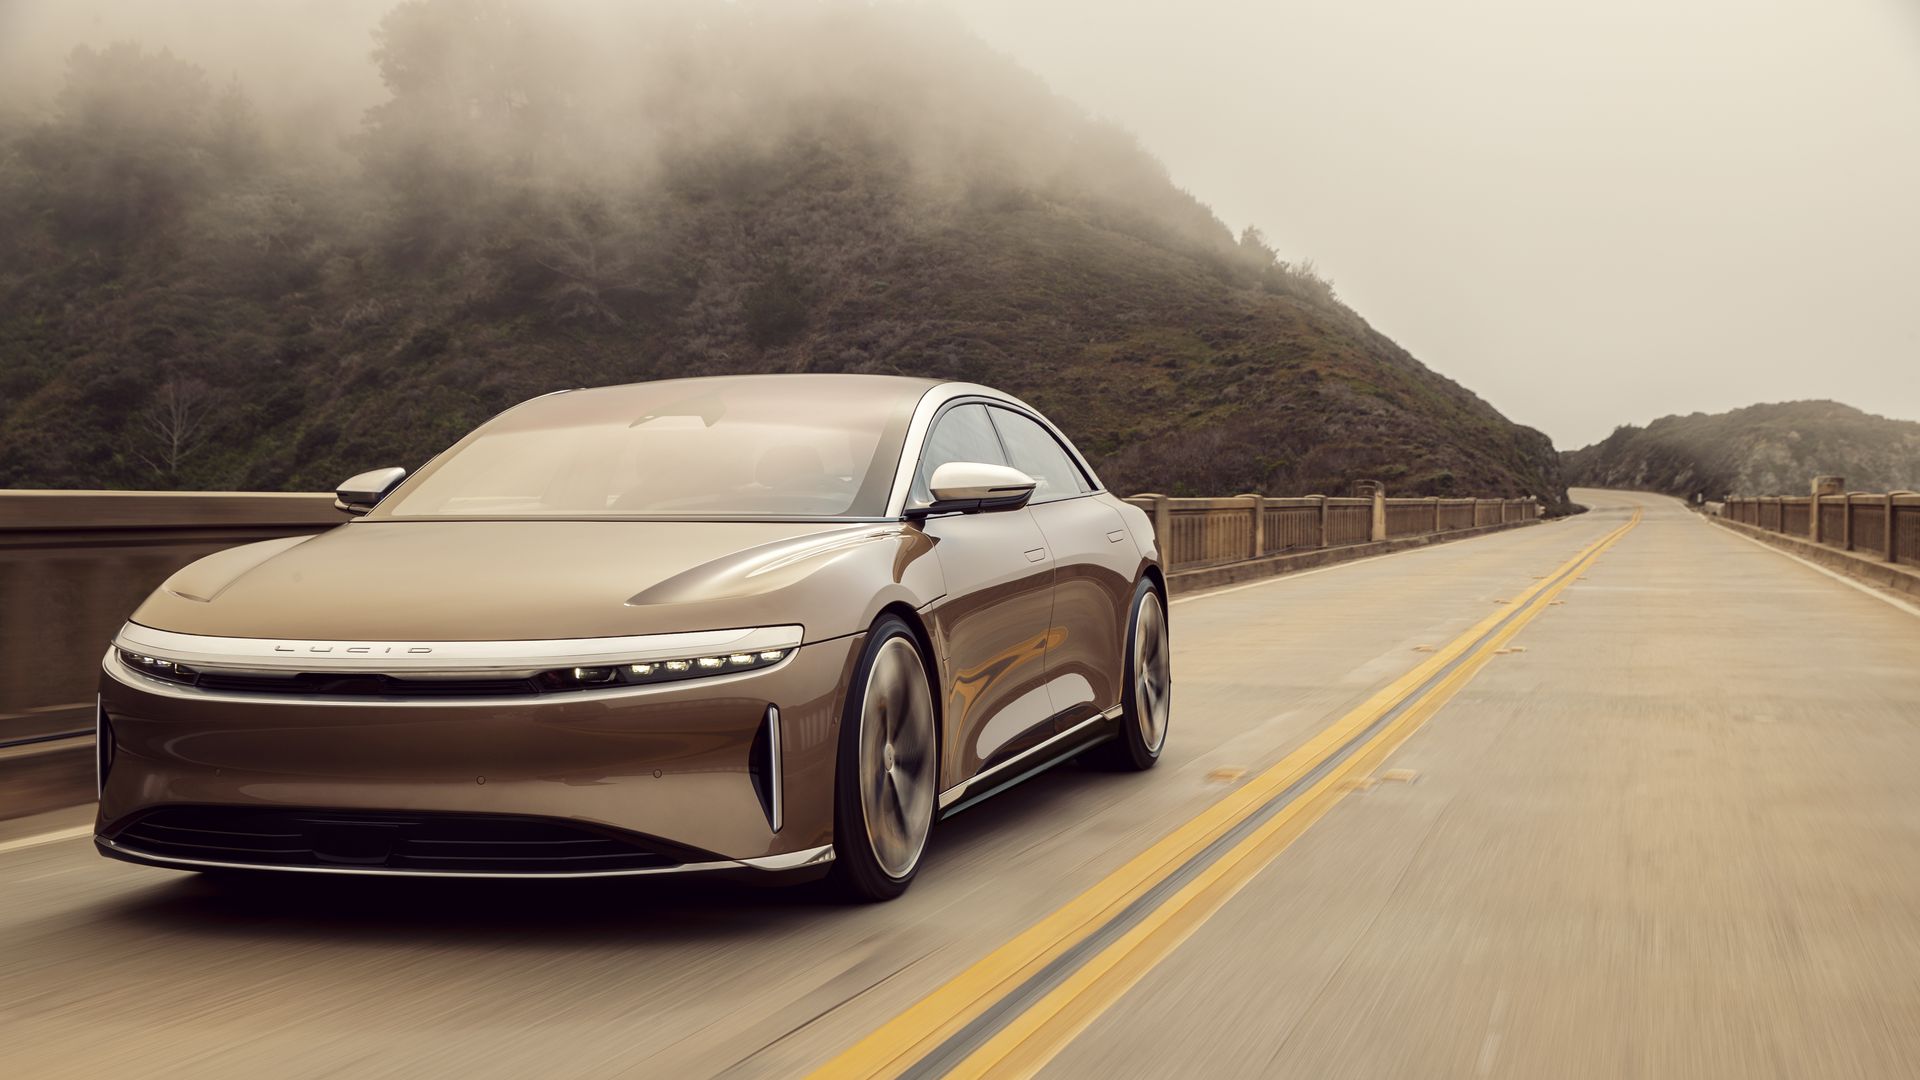 The 2022 Lucid Air automobile